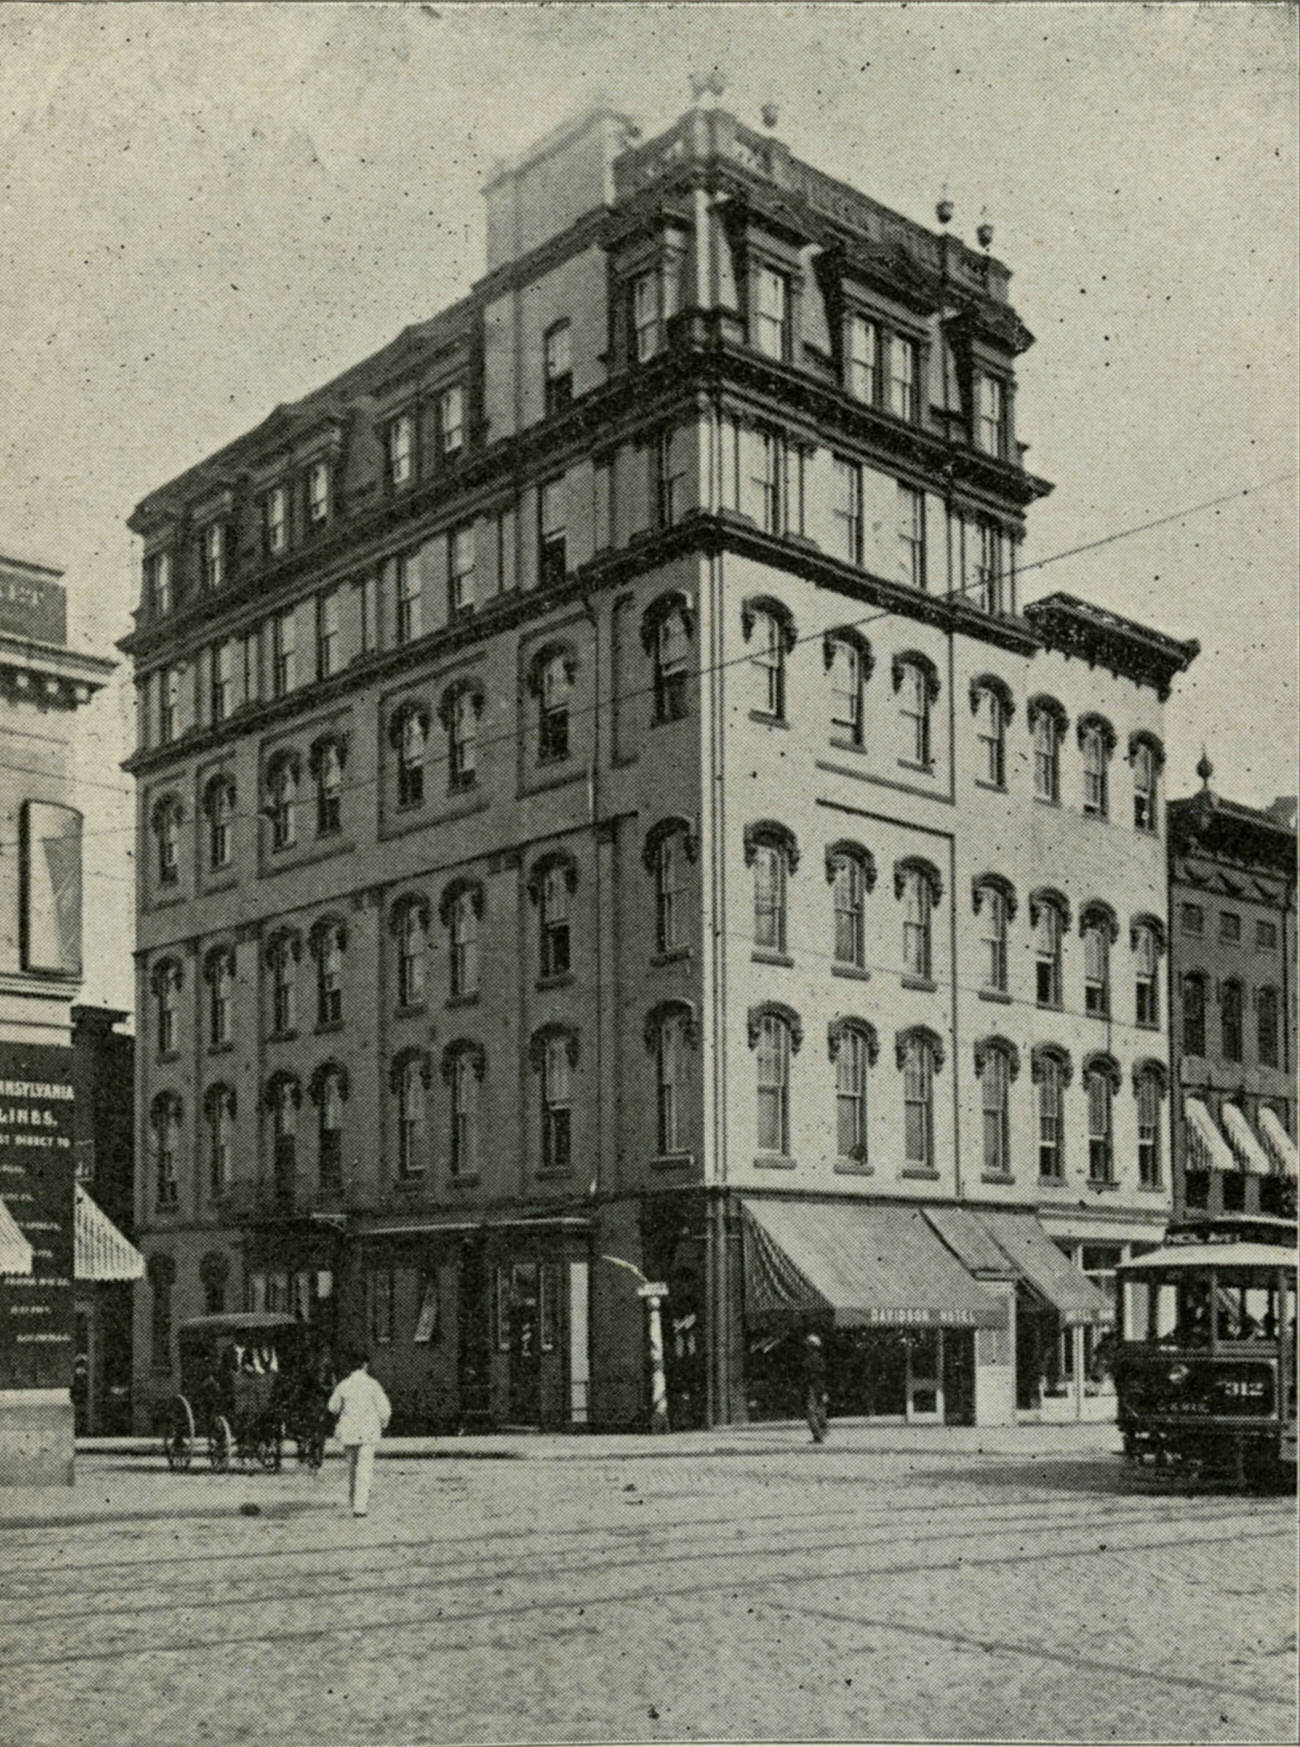 Davidson Hotel at the intersection of High Street and Naghten, Columbus, 1898.